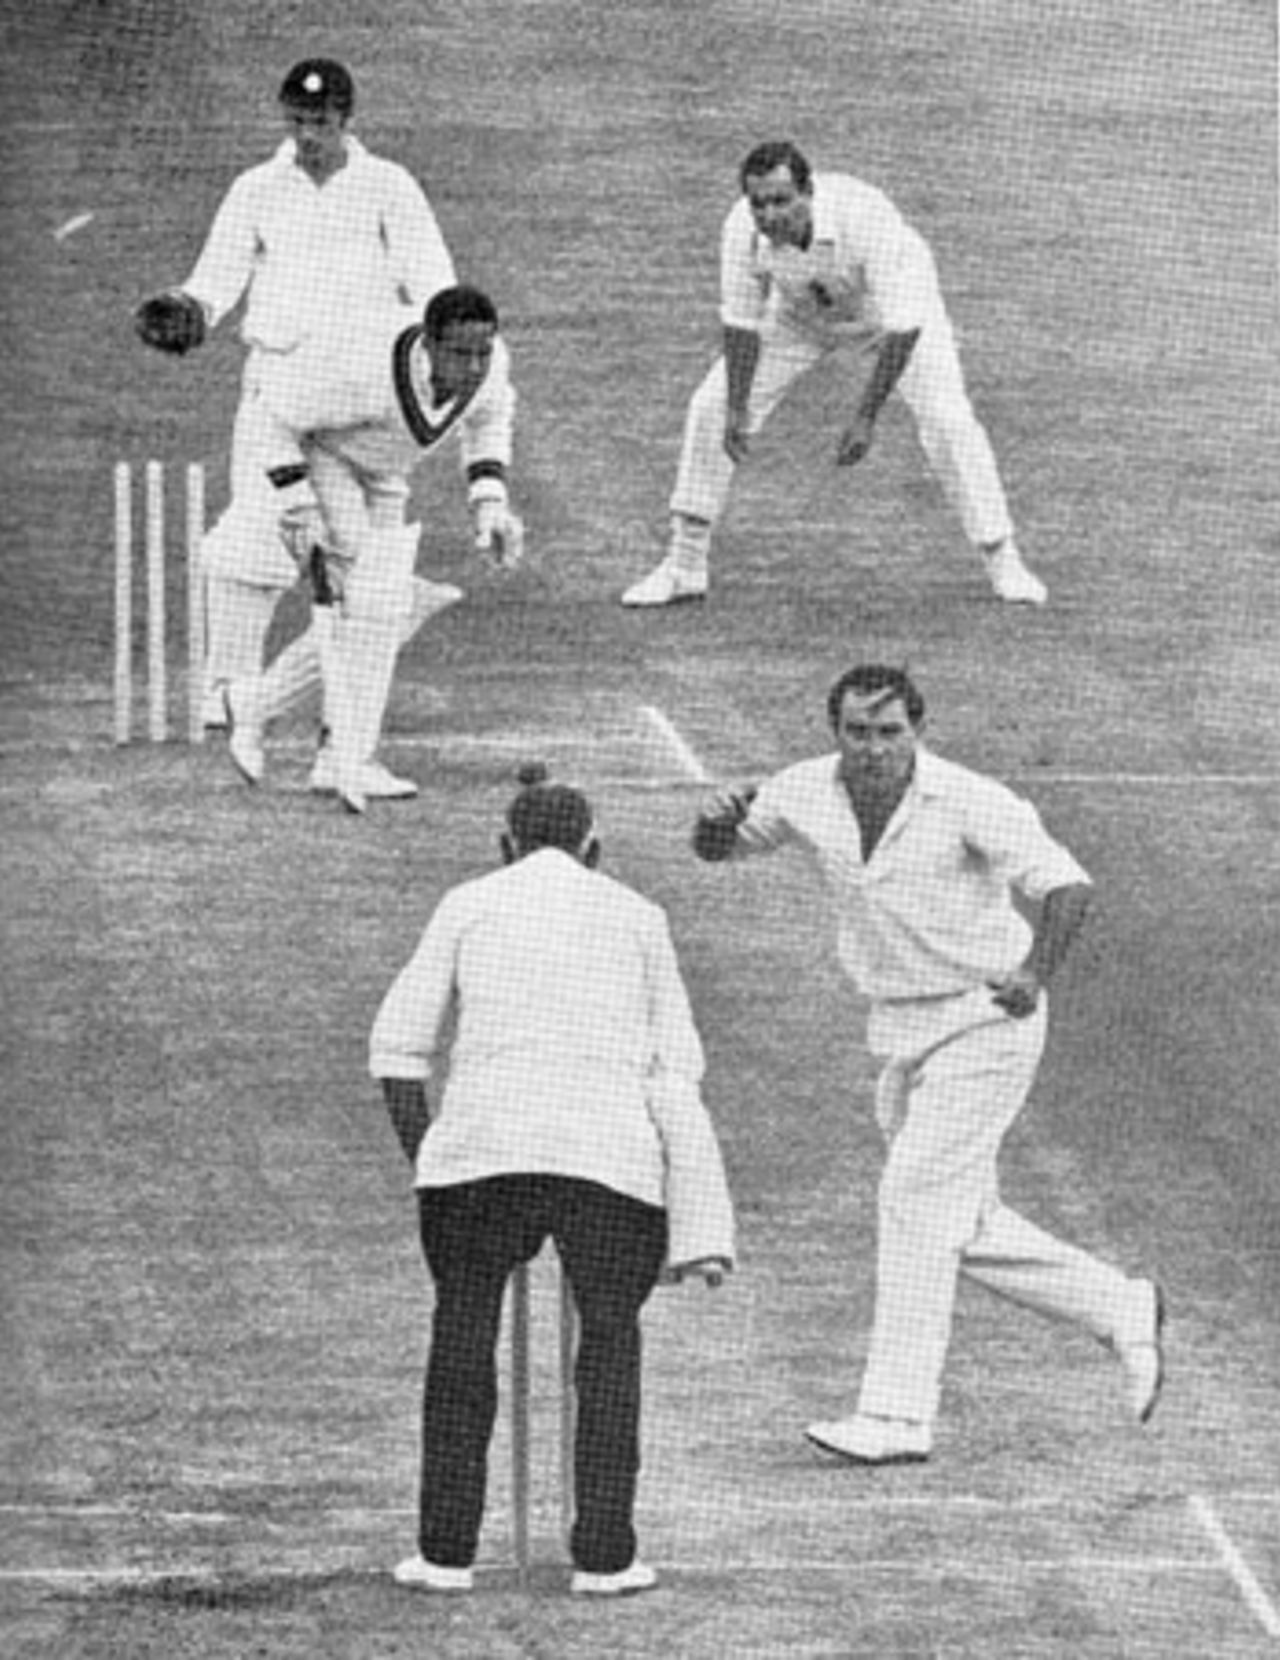 Garry Sobers is bowled by Ray Illingworth for 80, England v Rest of the World, Lord's, June 1970